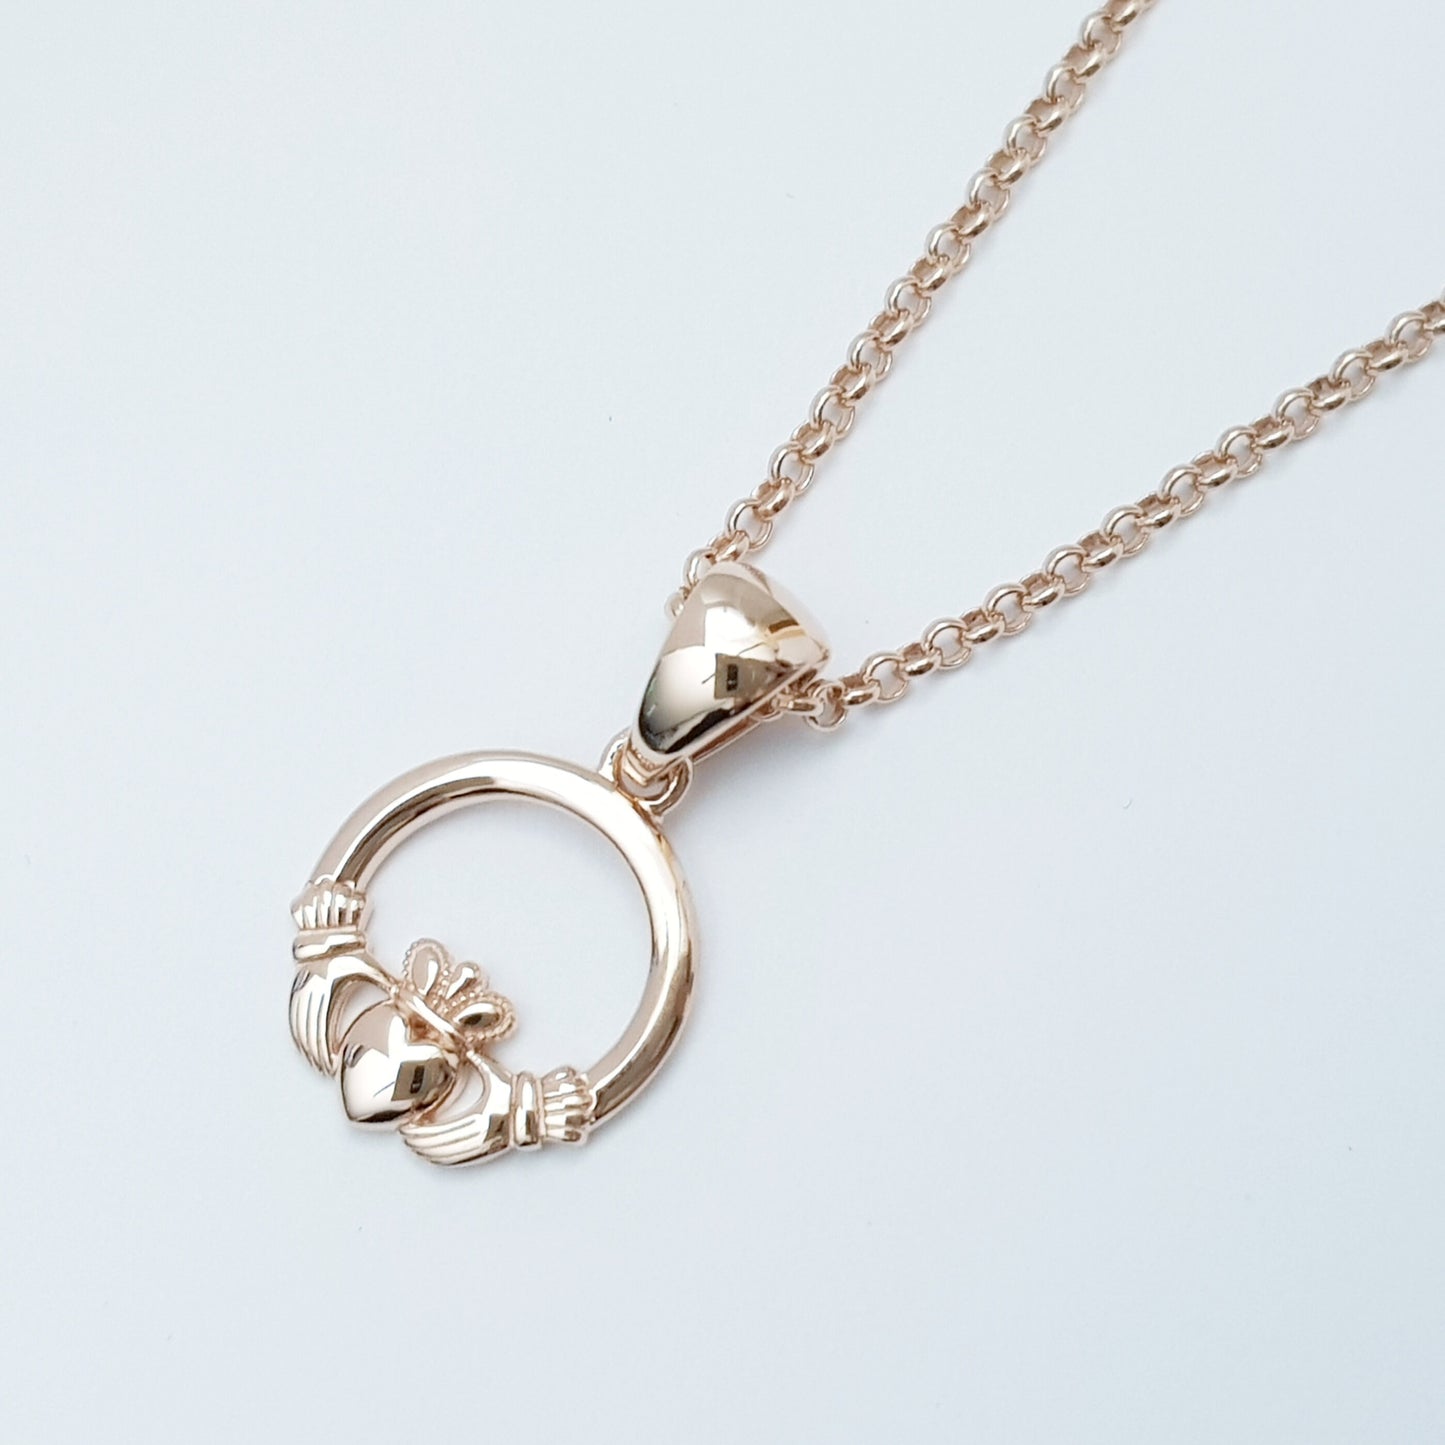 Rose gold plated Claddagh pendant, Irish claddagh necklace from Galway, Ireland, Sterling Silver claddagh necklace